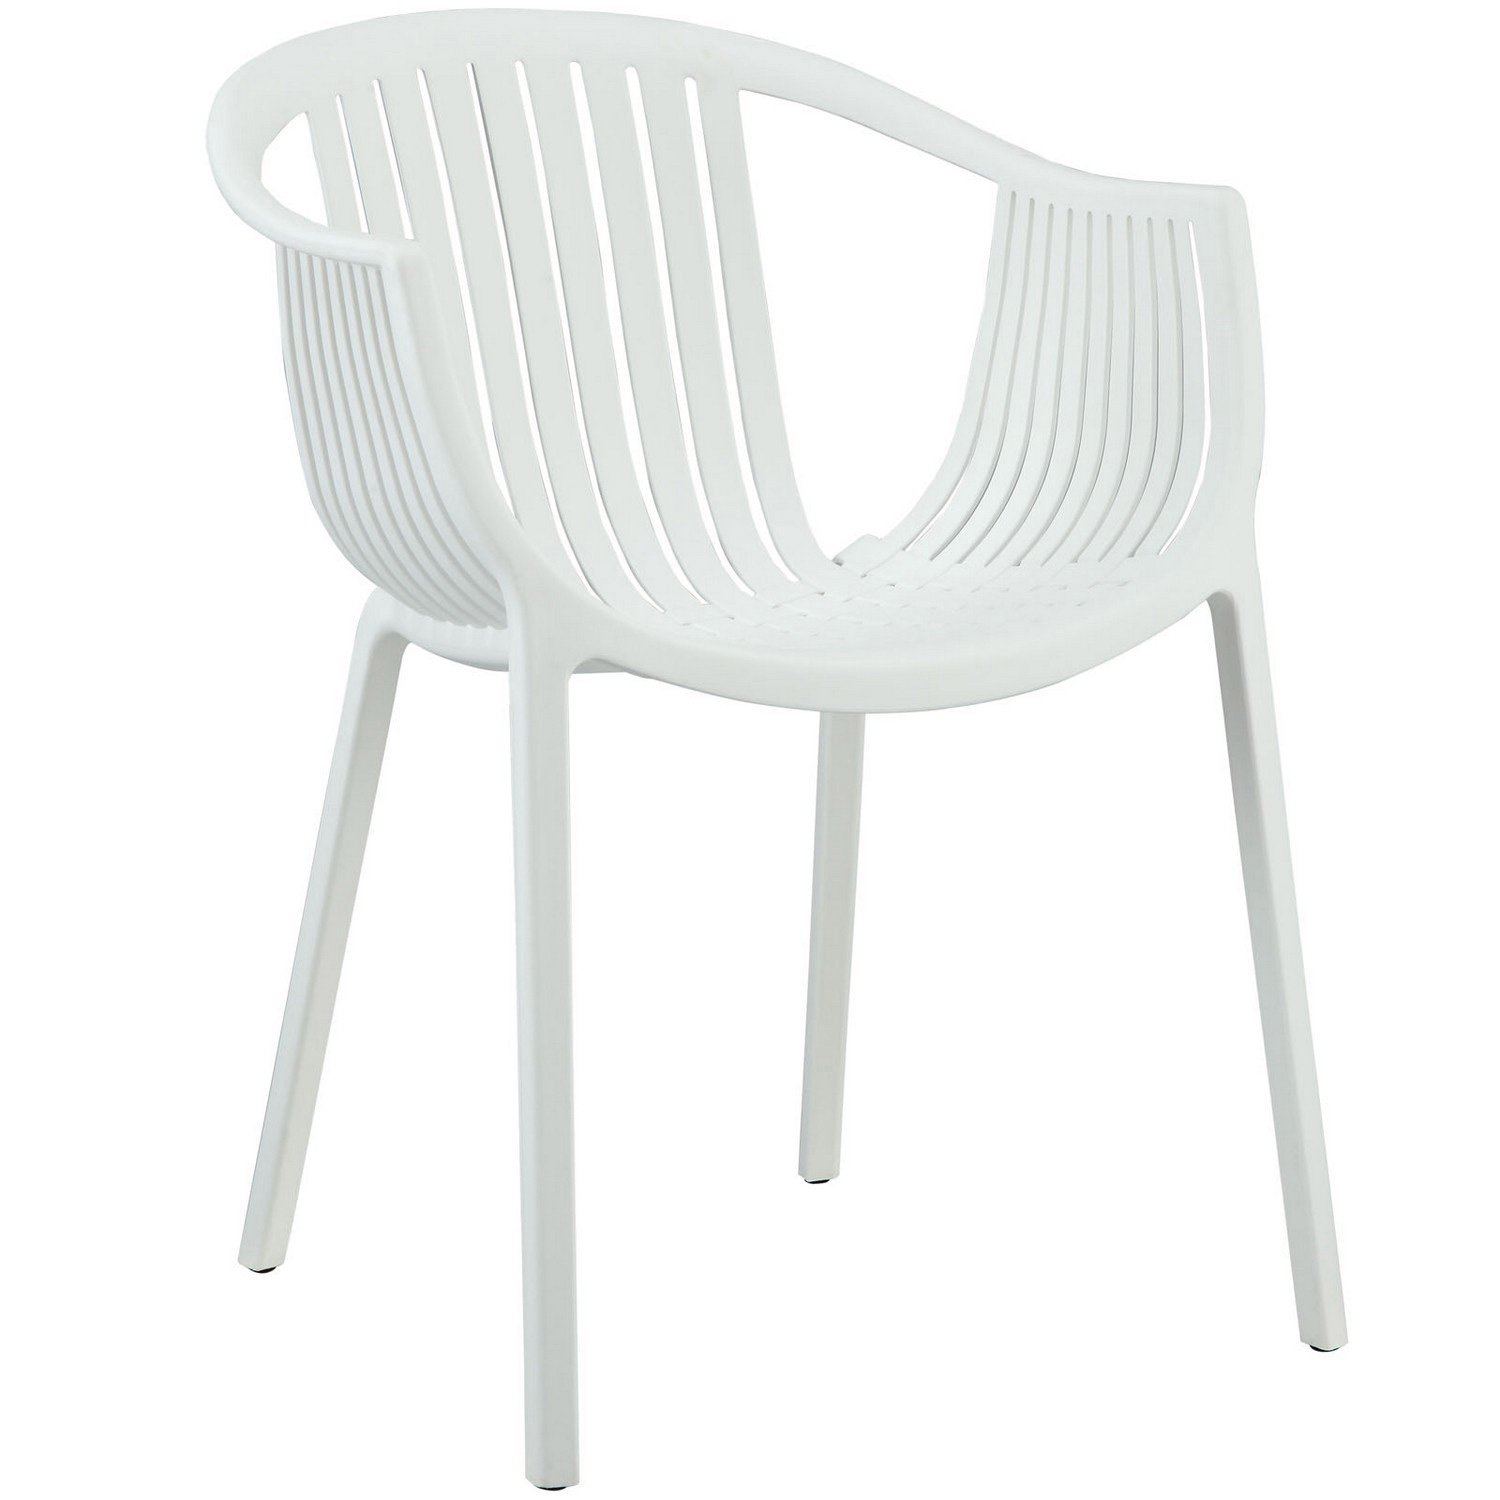 Modway Hammock Dining Arm Chair - White